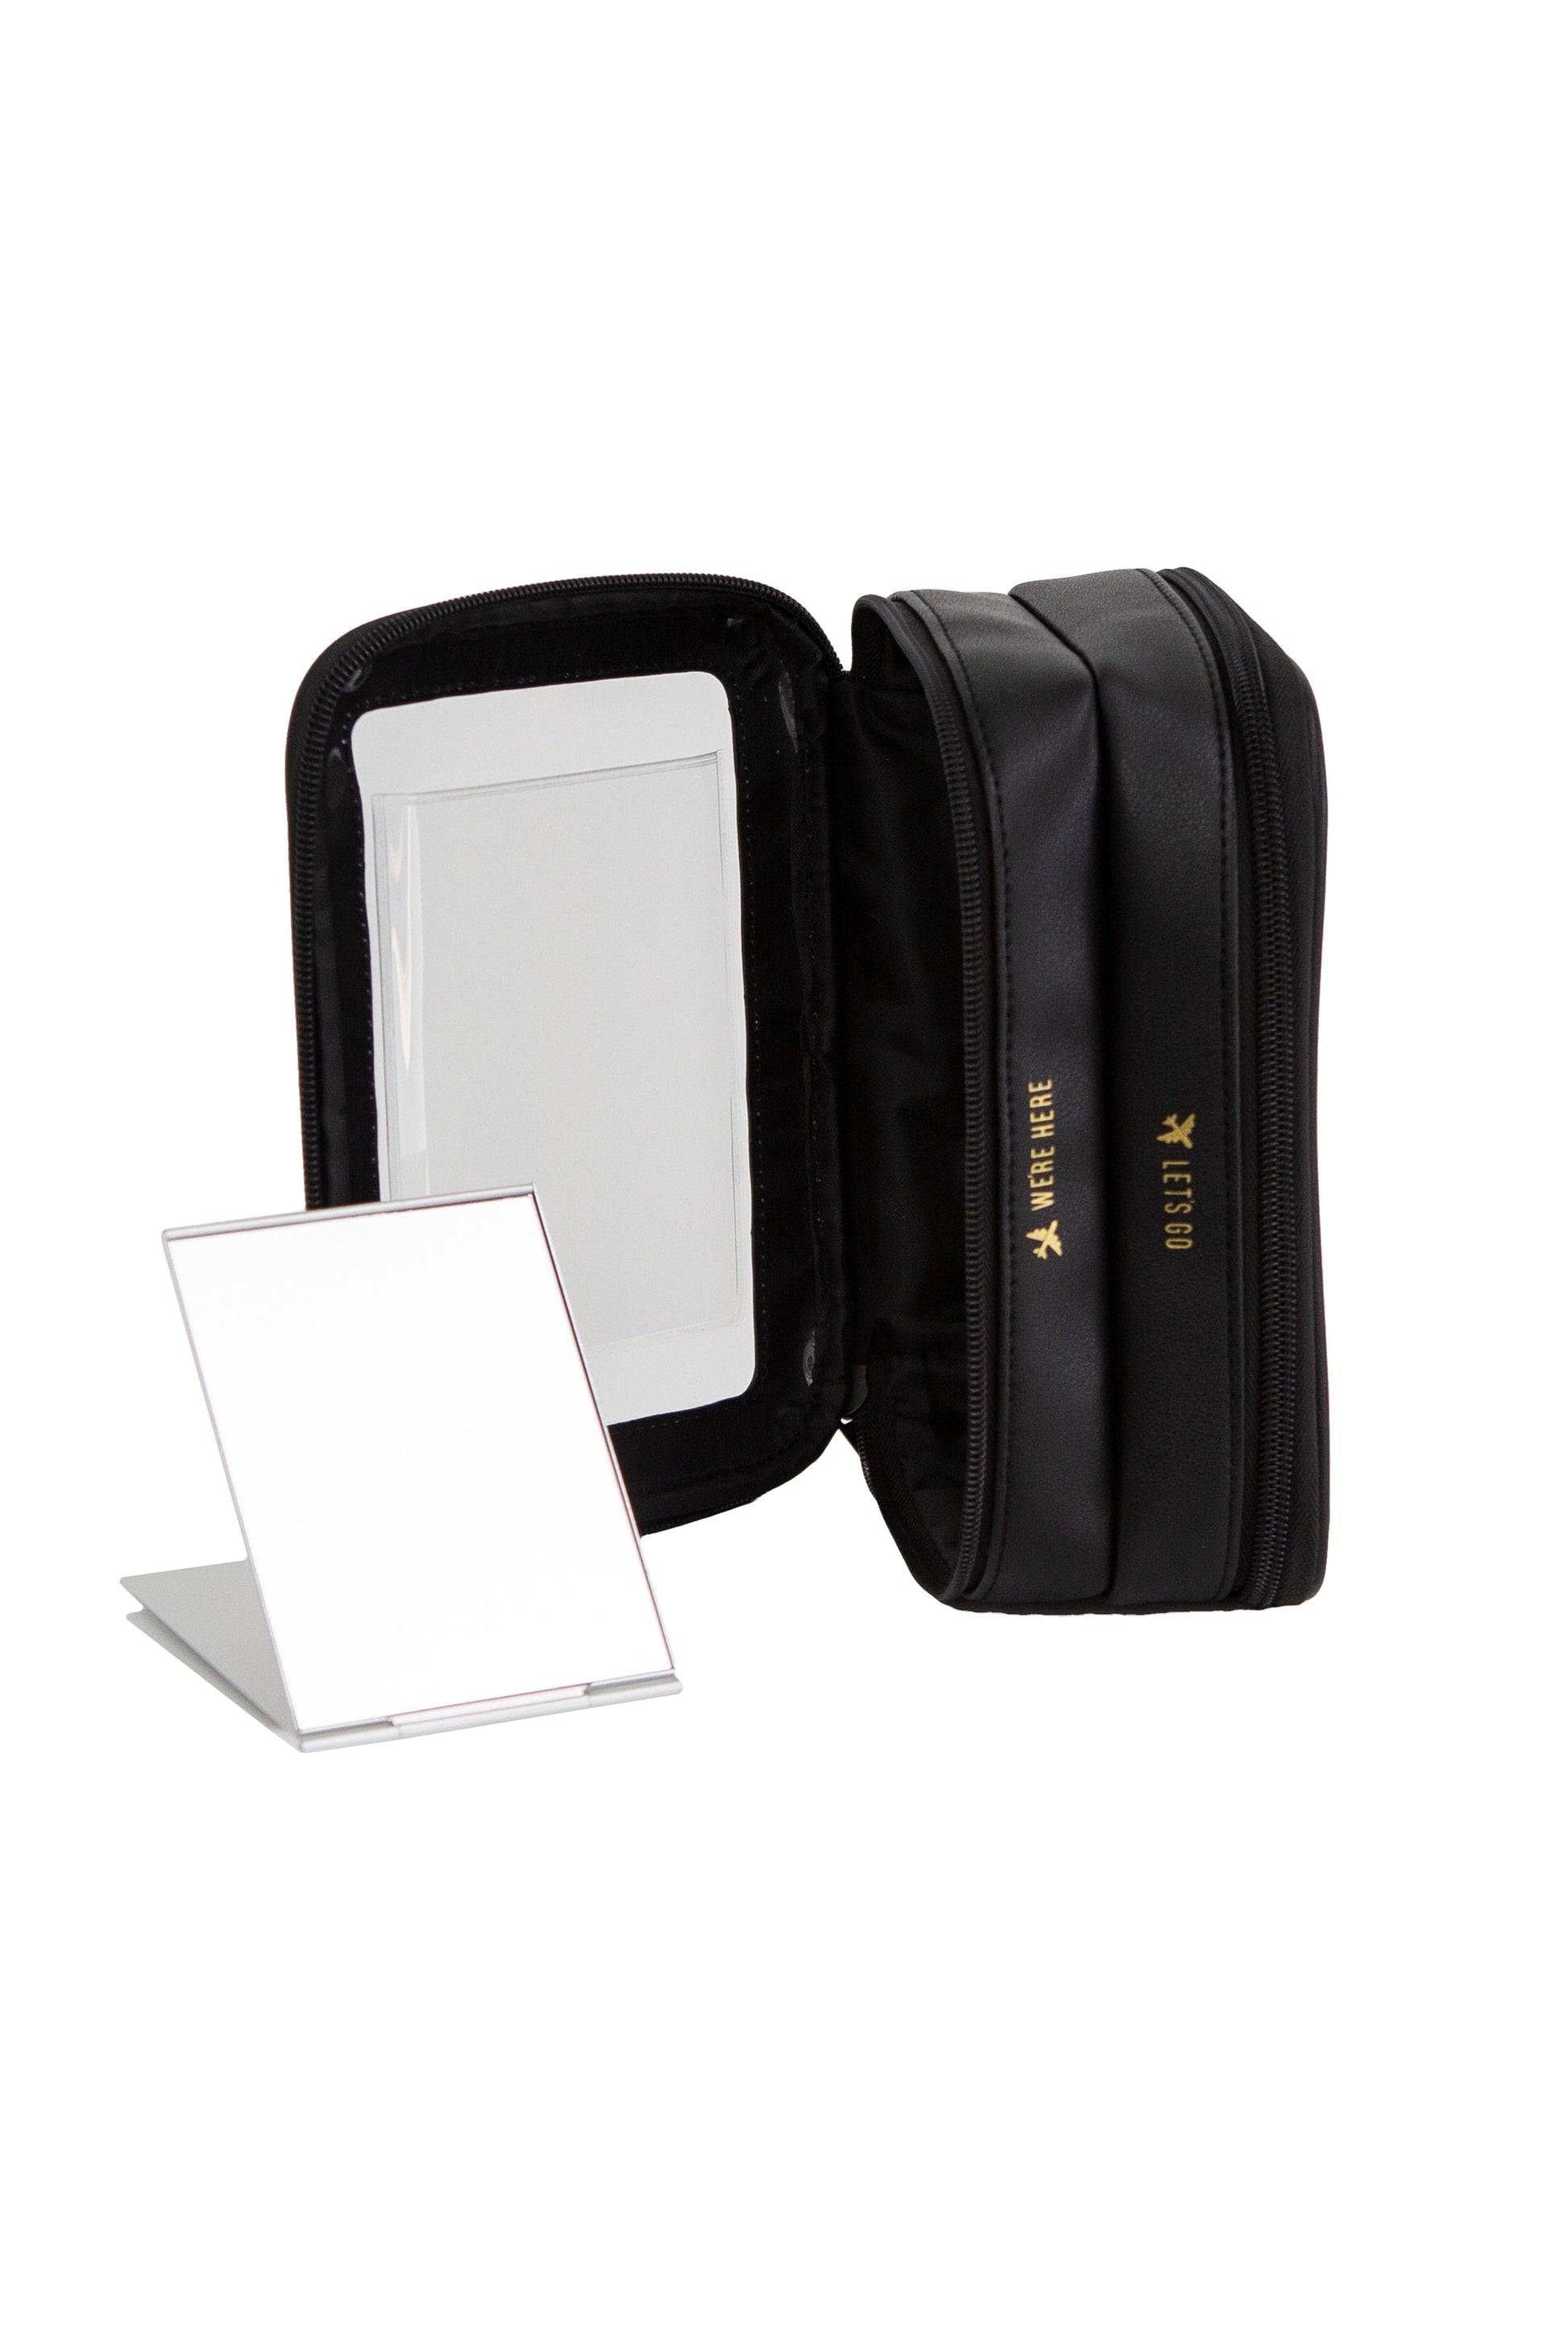 BEIS by Shay Mitchell | The On-The-Go Essential case in black (Product Image - interior with mirror)